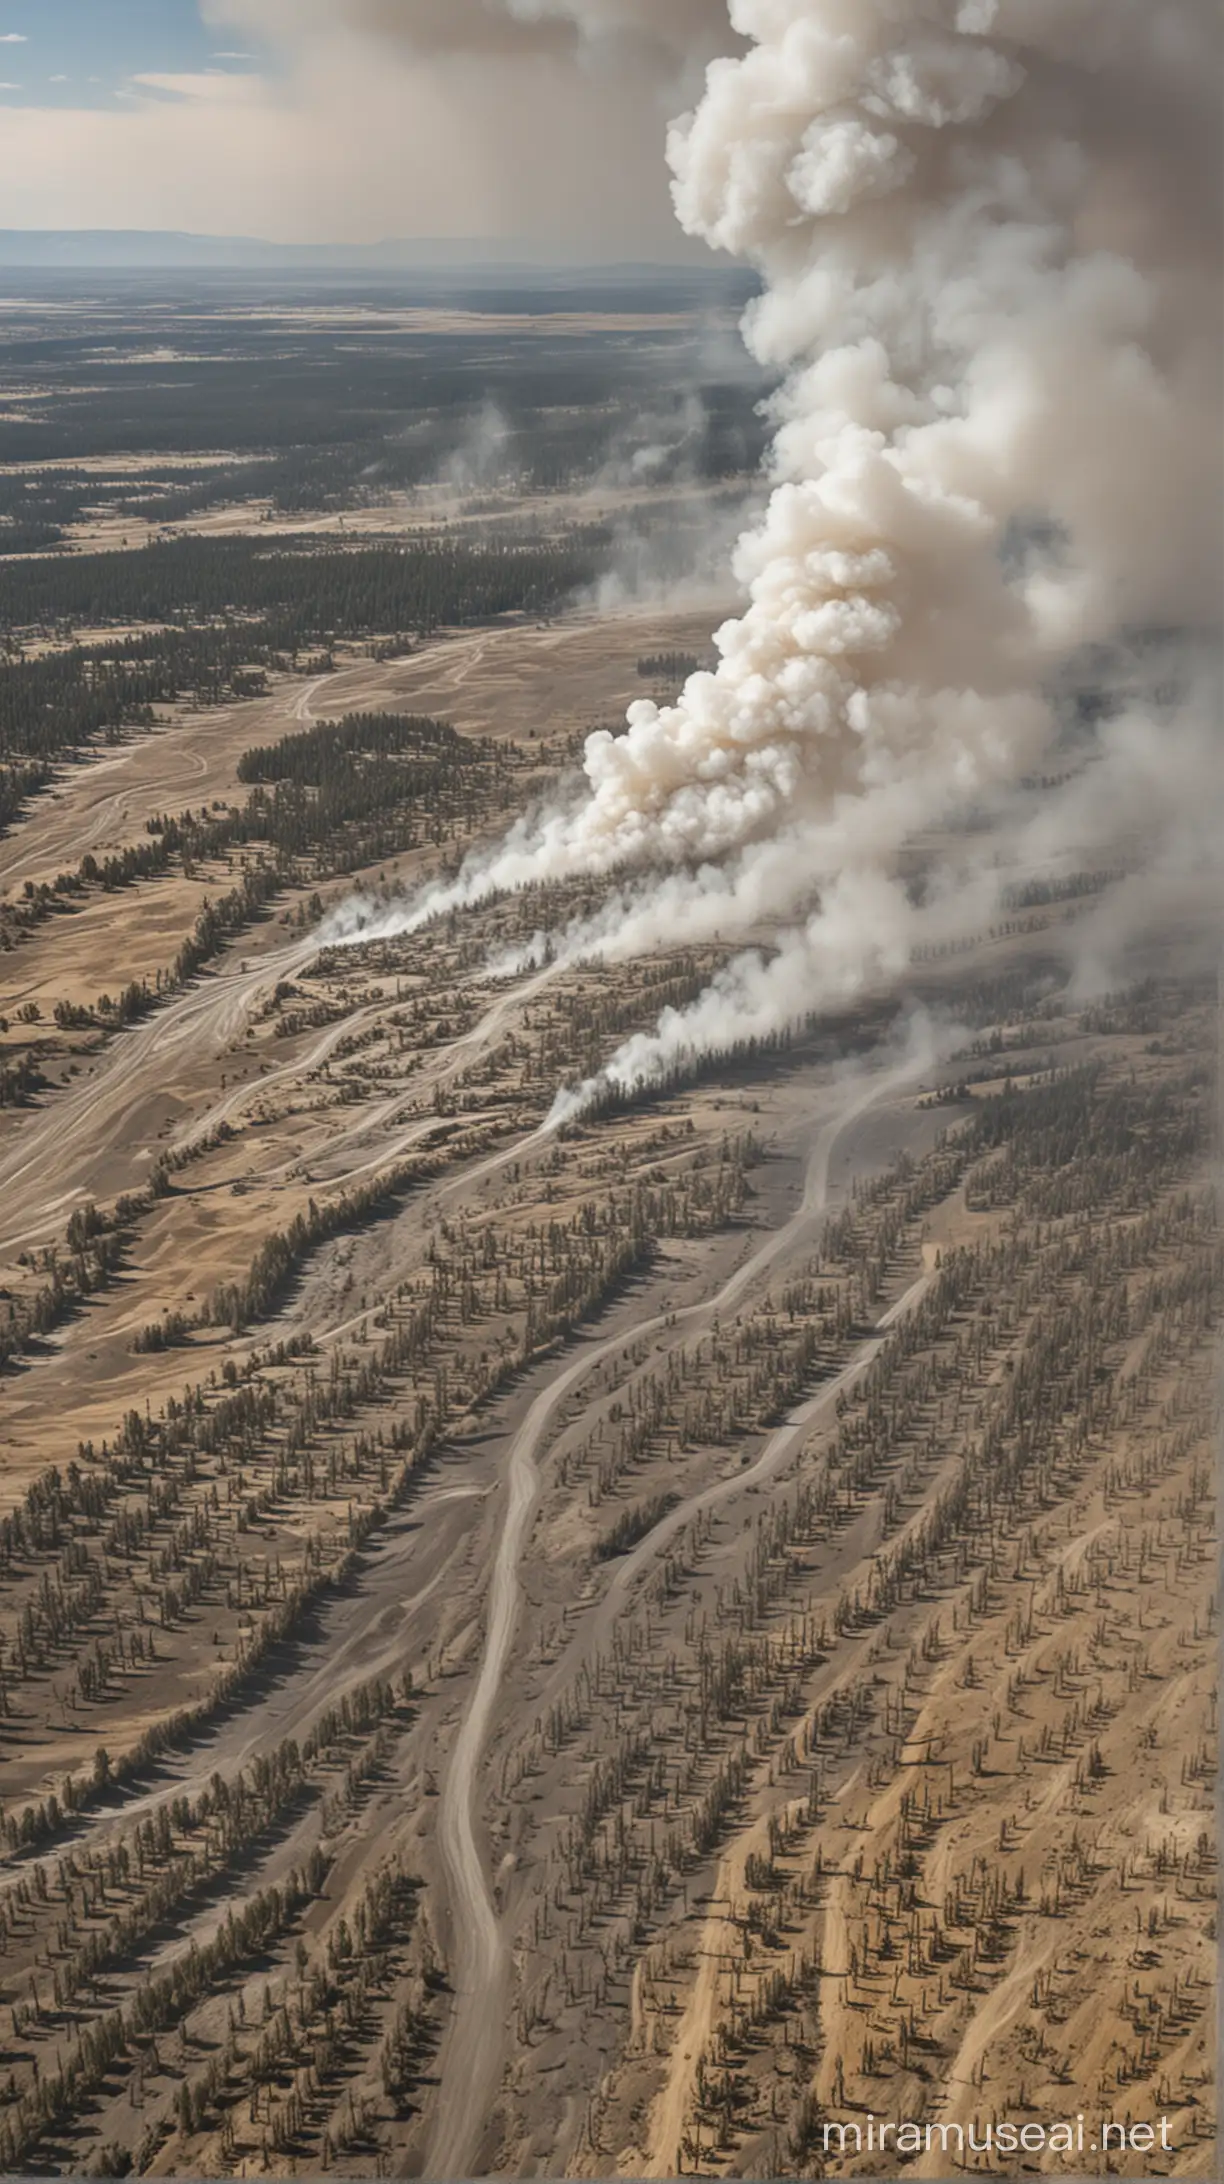  Create a realistic image of  scene showing heavy ash fall in regions surrounding Yellowstone, such as Wyoming, Montana, Idaho, Utah, and Colorado, disrupting air travel and damaging crops and livestock.